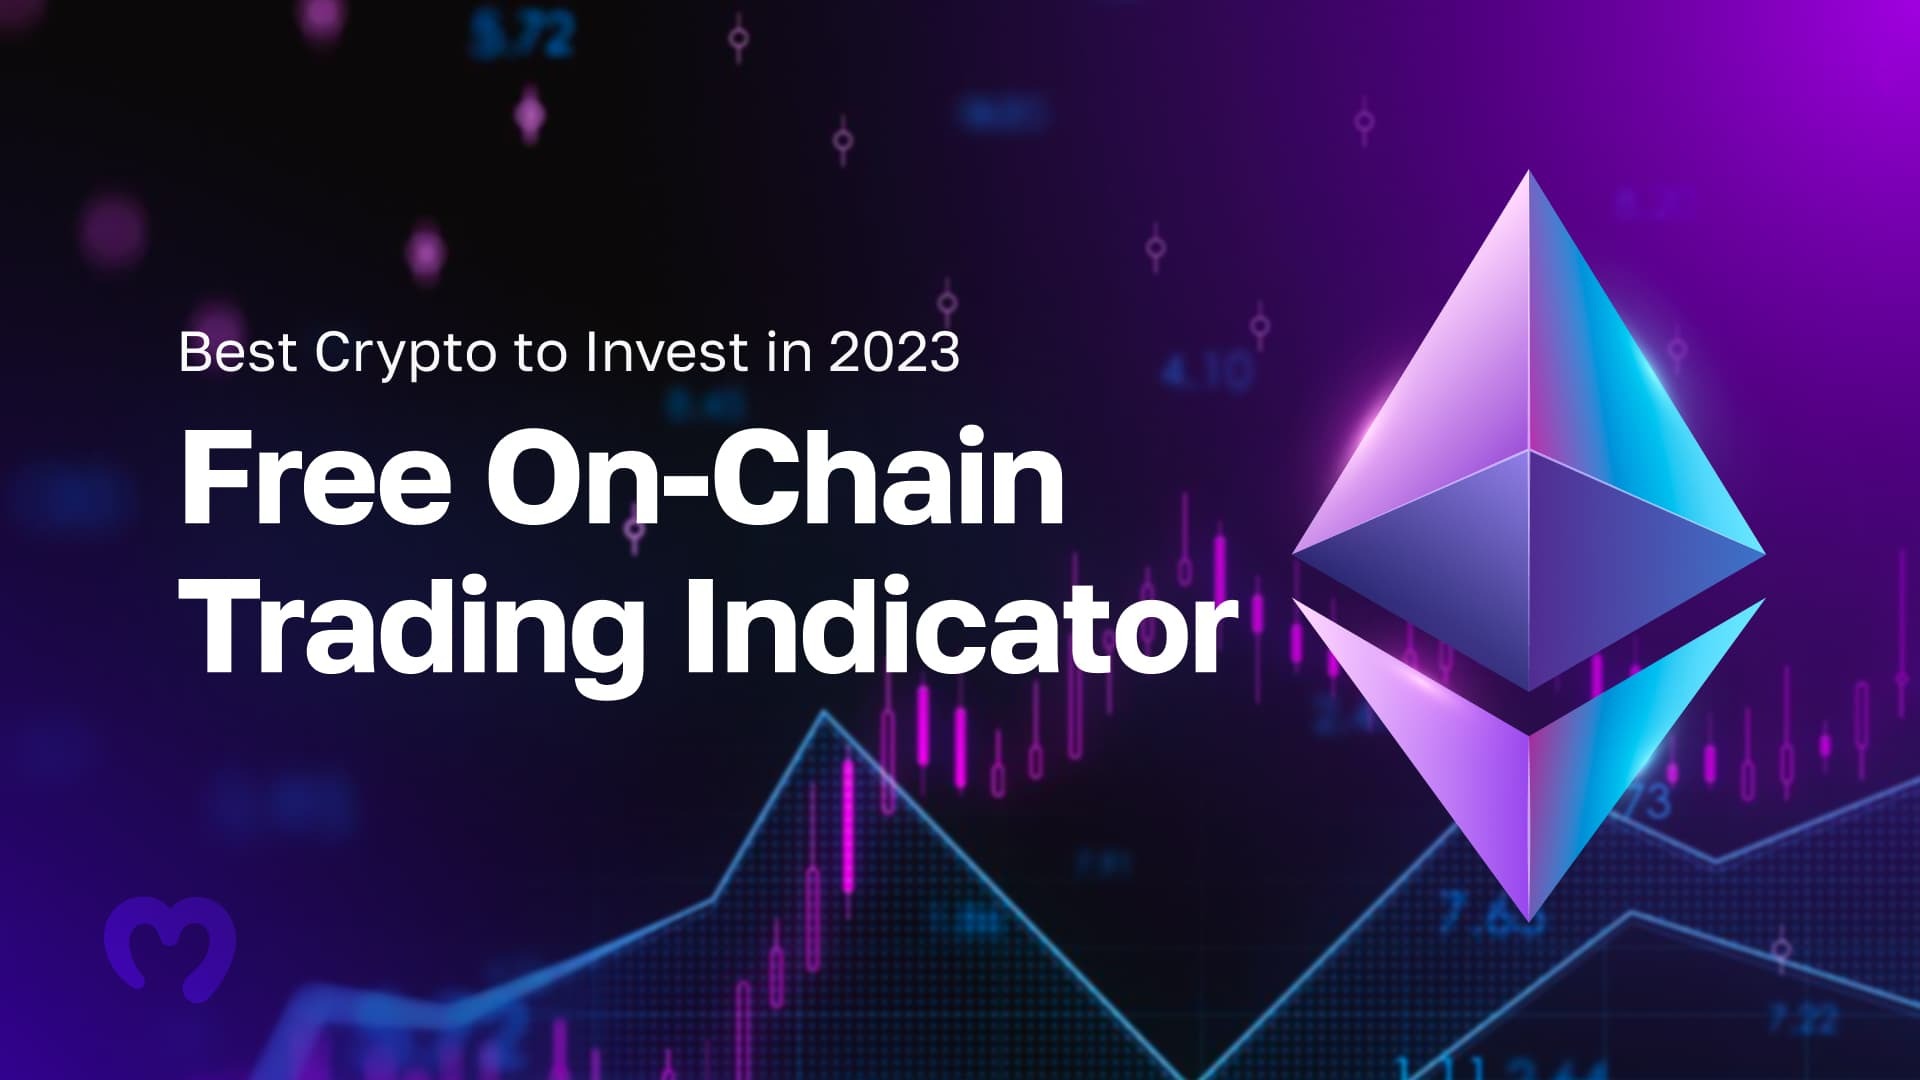 Best Crypto to Invest in 2023 - Free On-Chain Trading Indicator